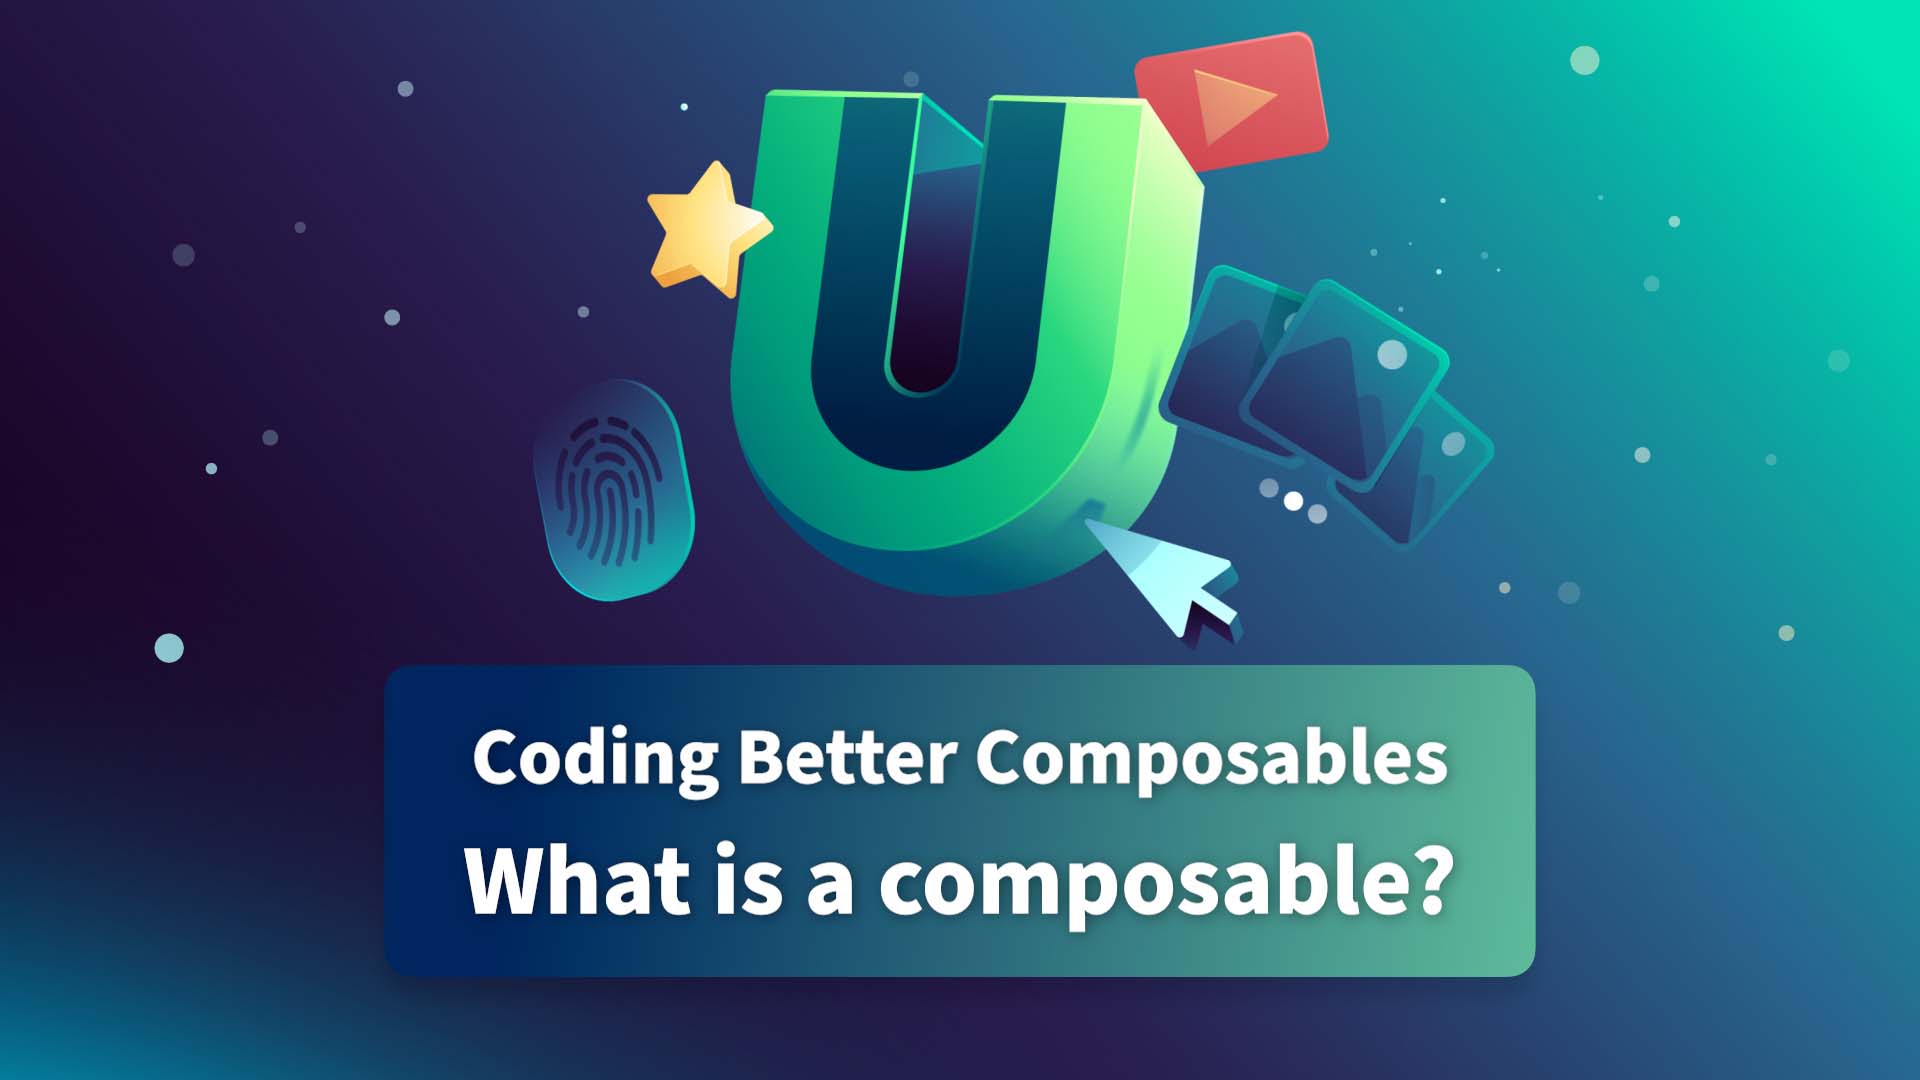 What is a Composable?